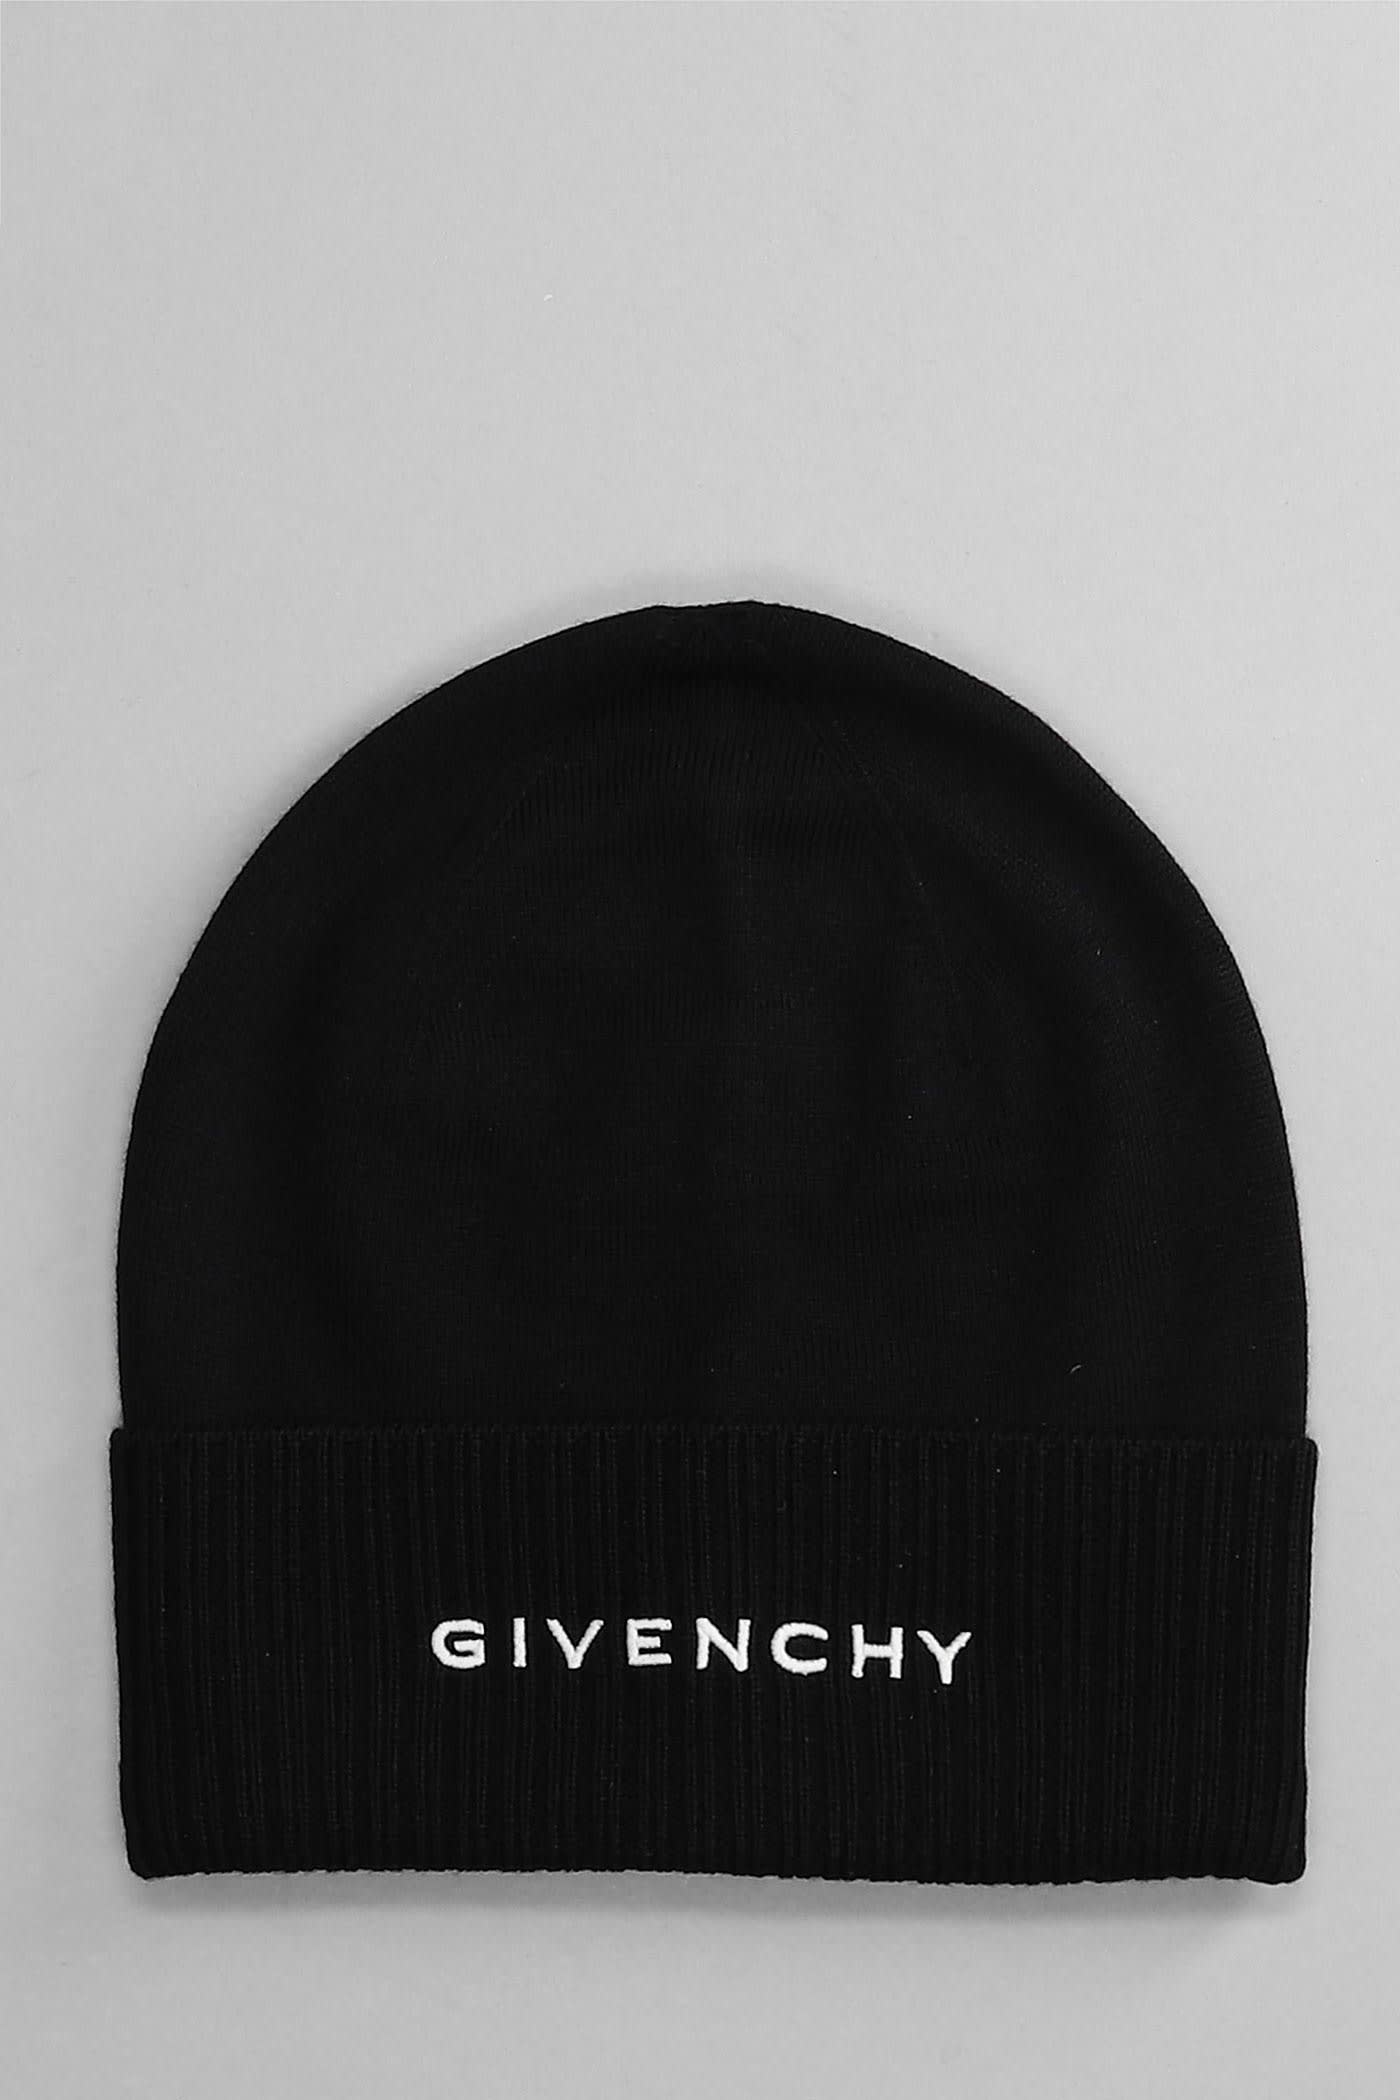 GIVENCHY HATS IN BLACK WOOL